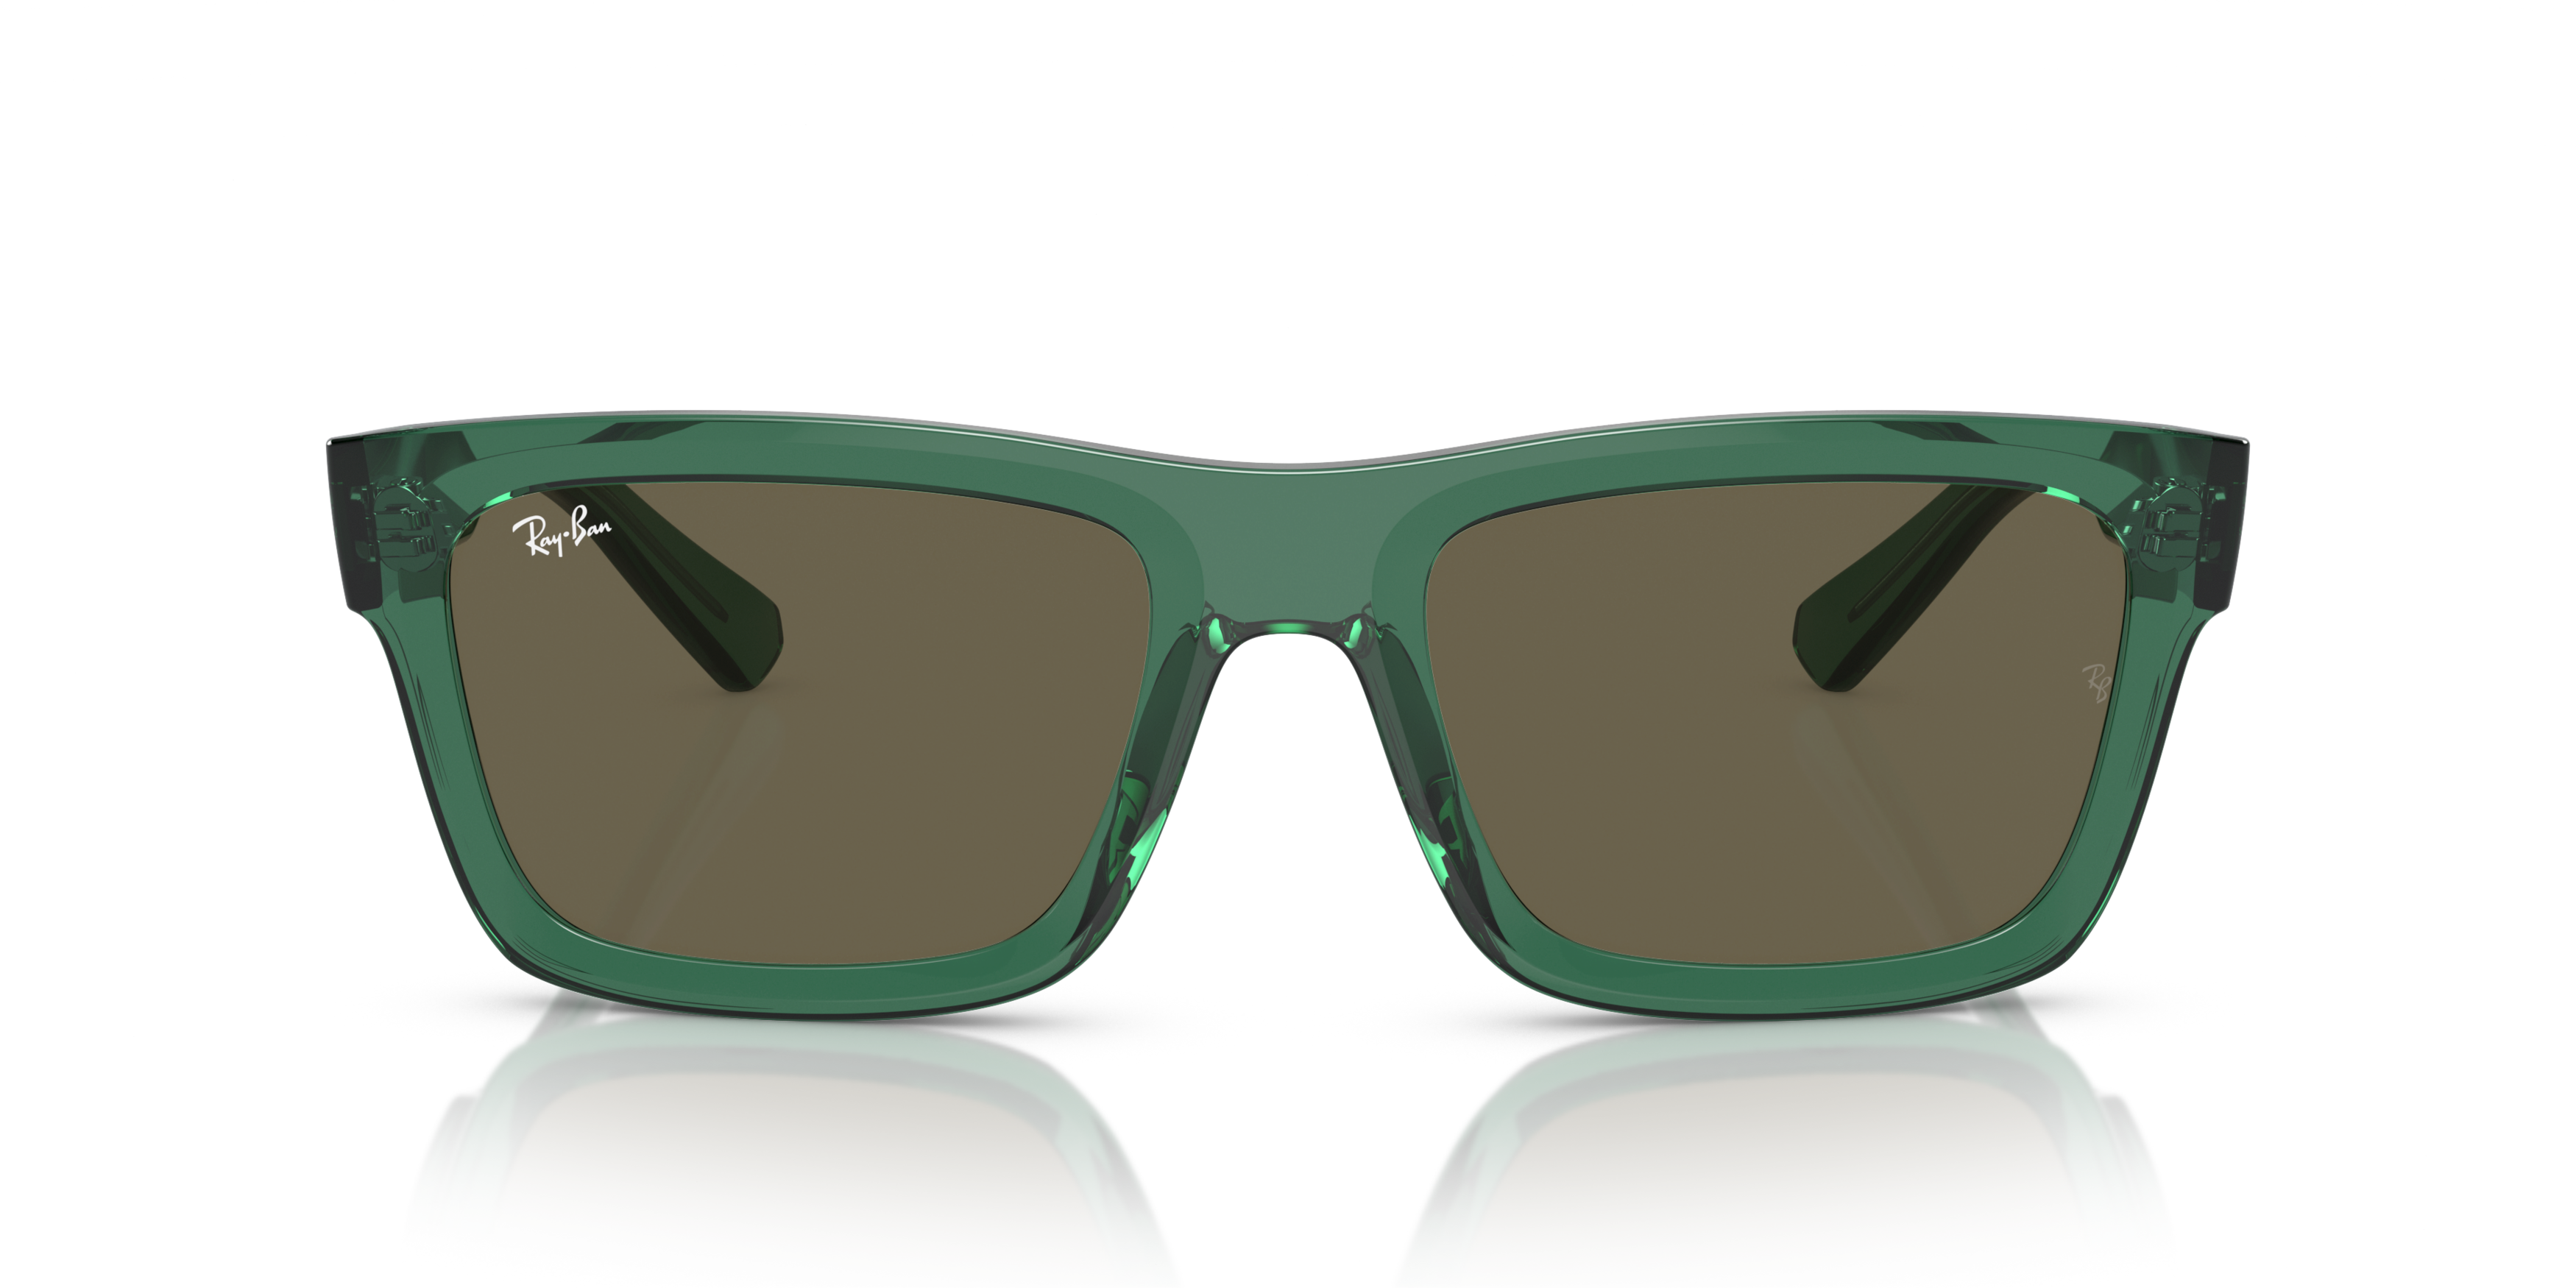 [products.image.front] Ray-Ban Warren RB4396 6681/3